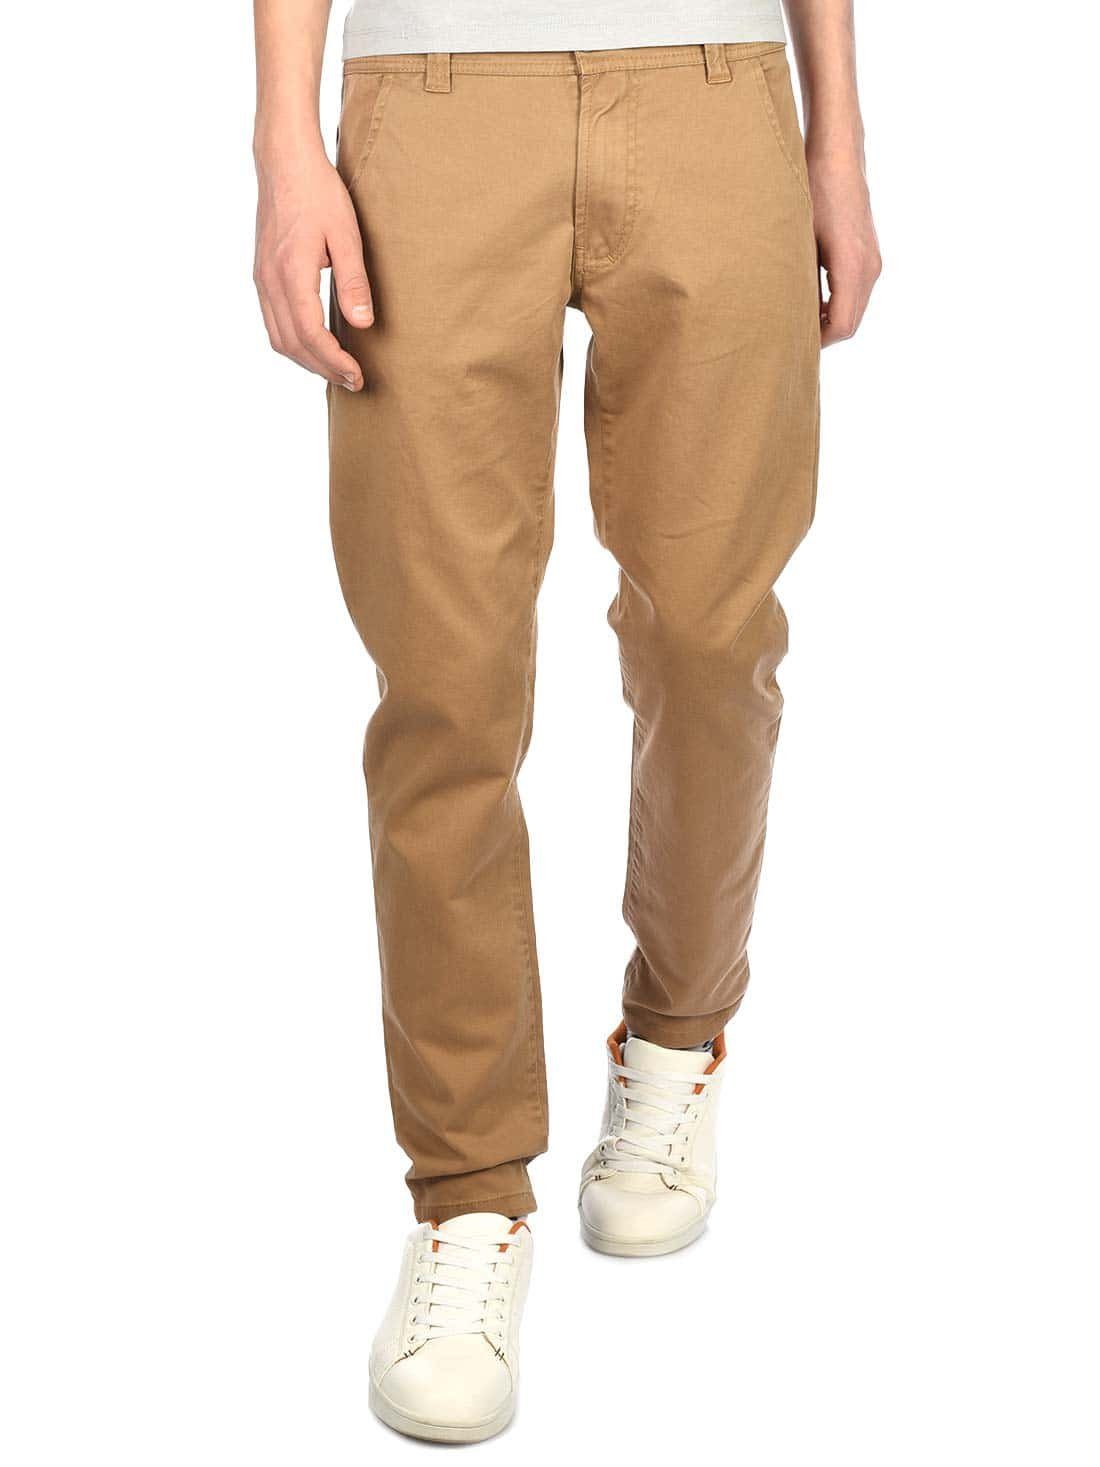 BEZLIT Chinohose casual Beige (1-tlg) Chino Jungen Hose